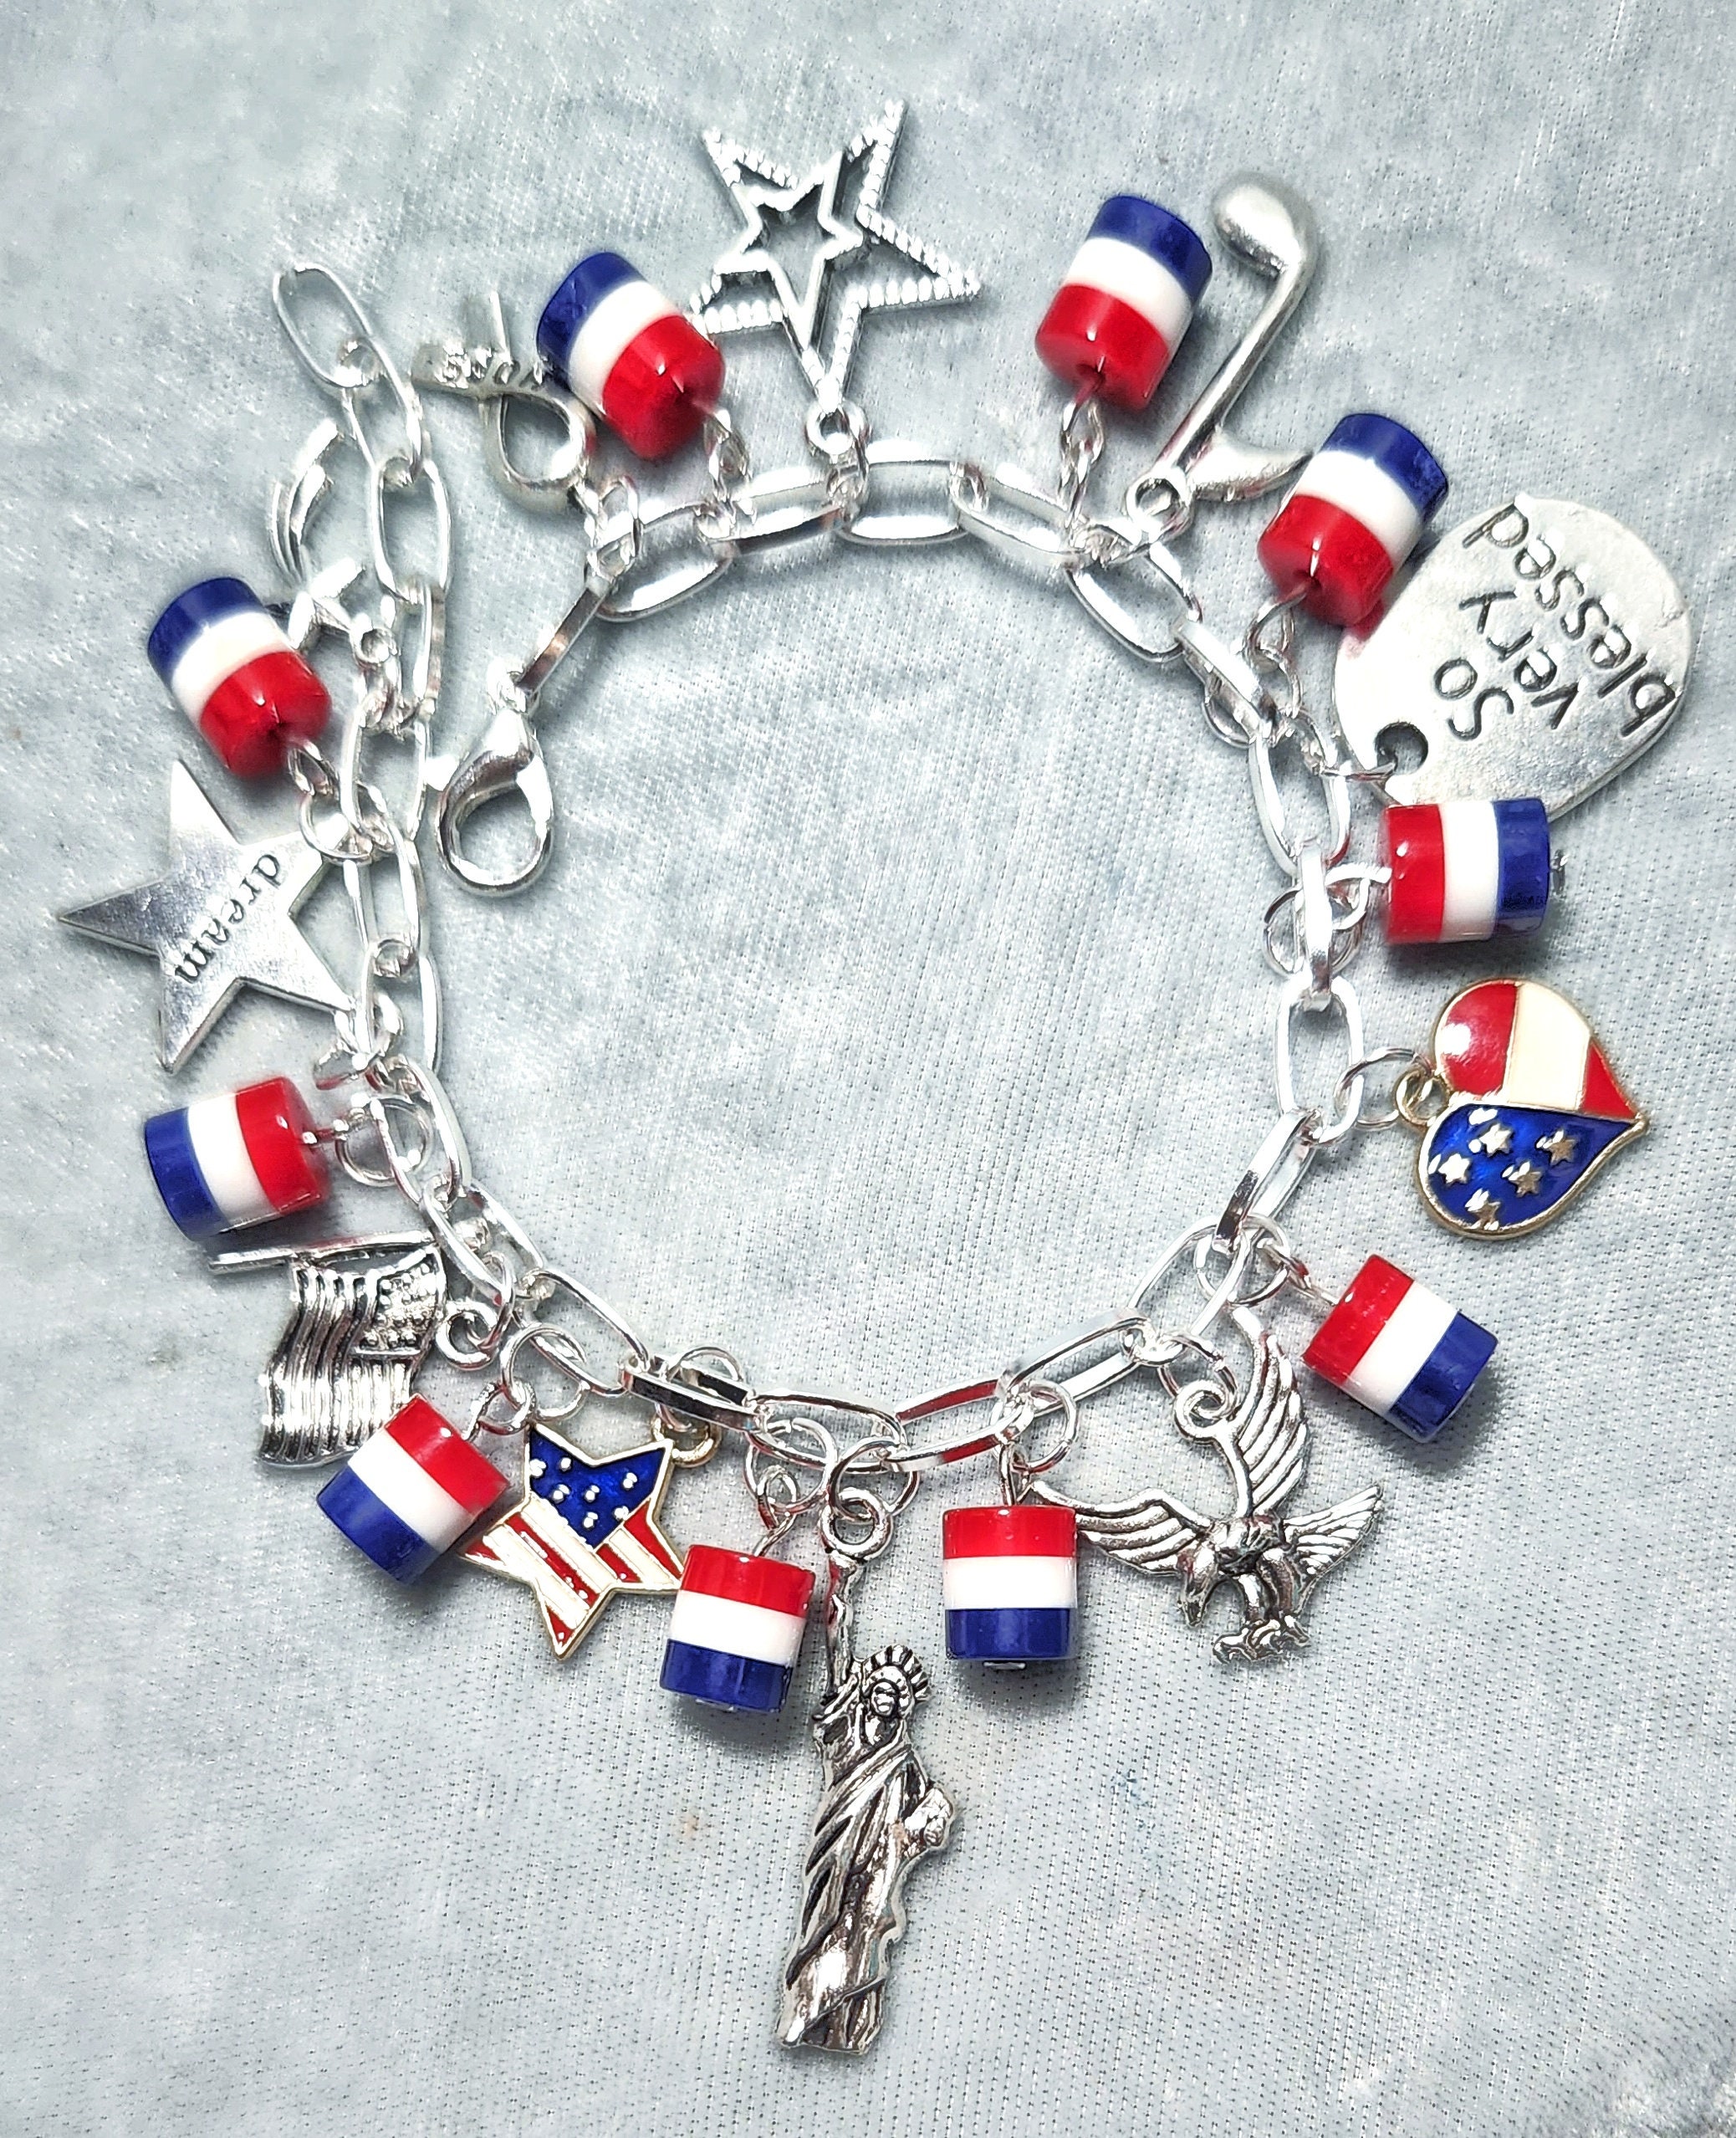 New Arrival Fashion Jewelry Bracelet Patriotic Style Star Beads Heart  Shaped American USA Flag Charm Bracelets for Women